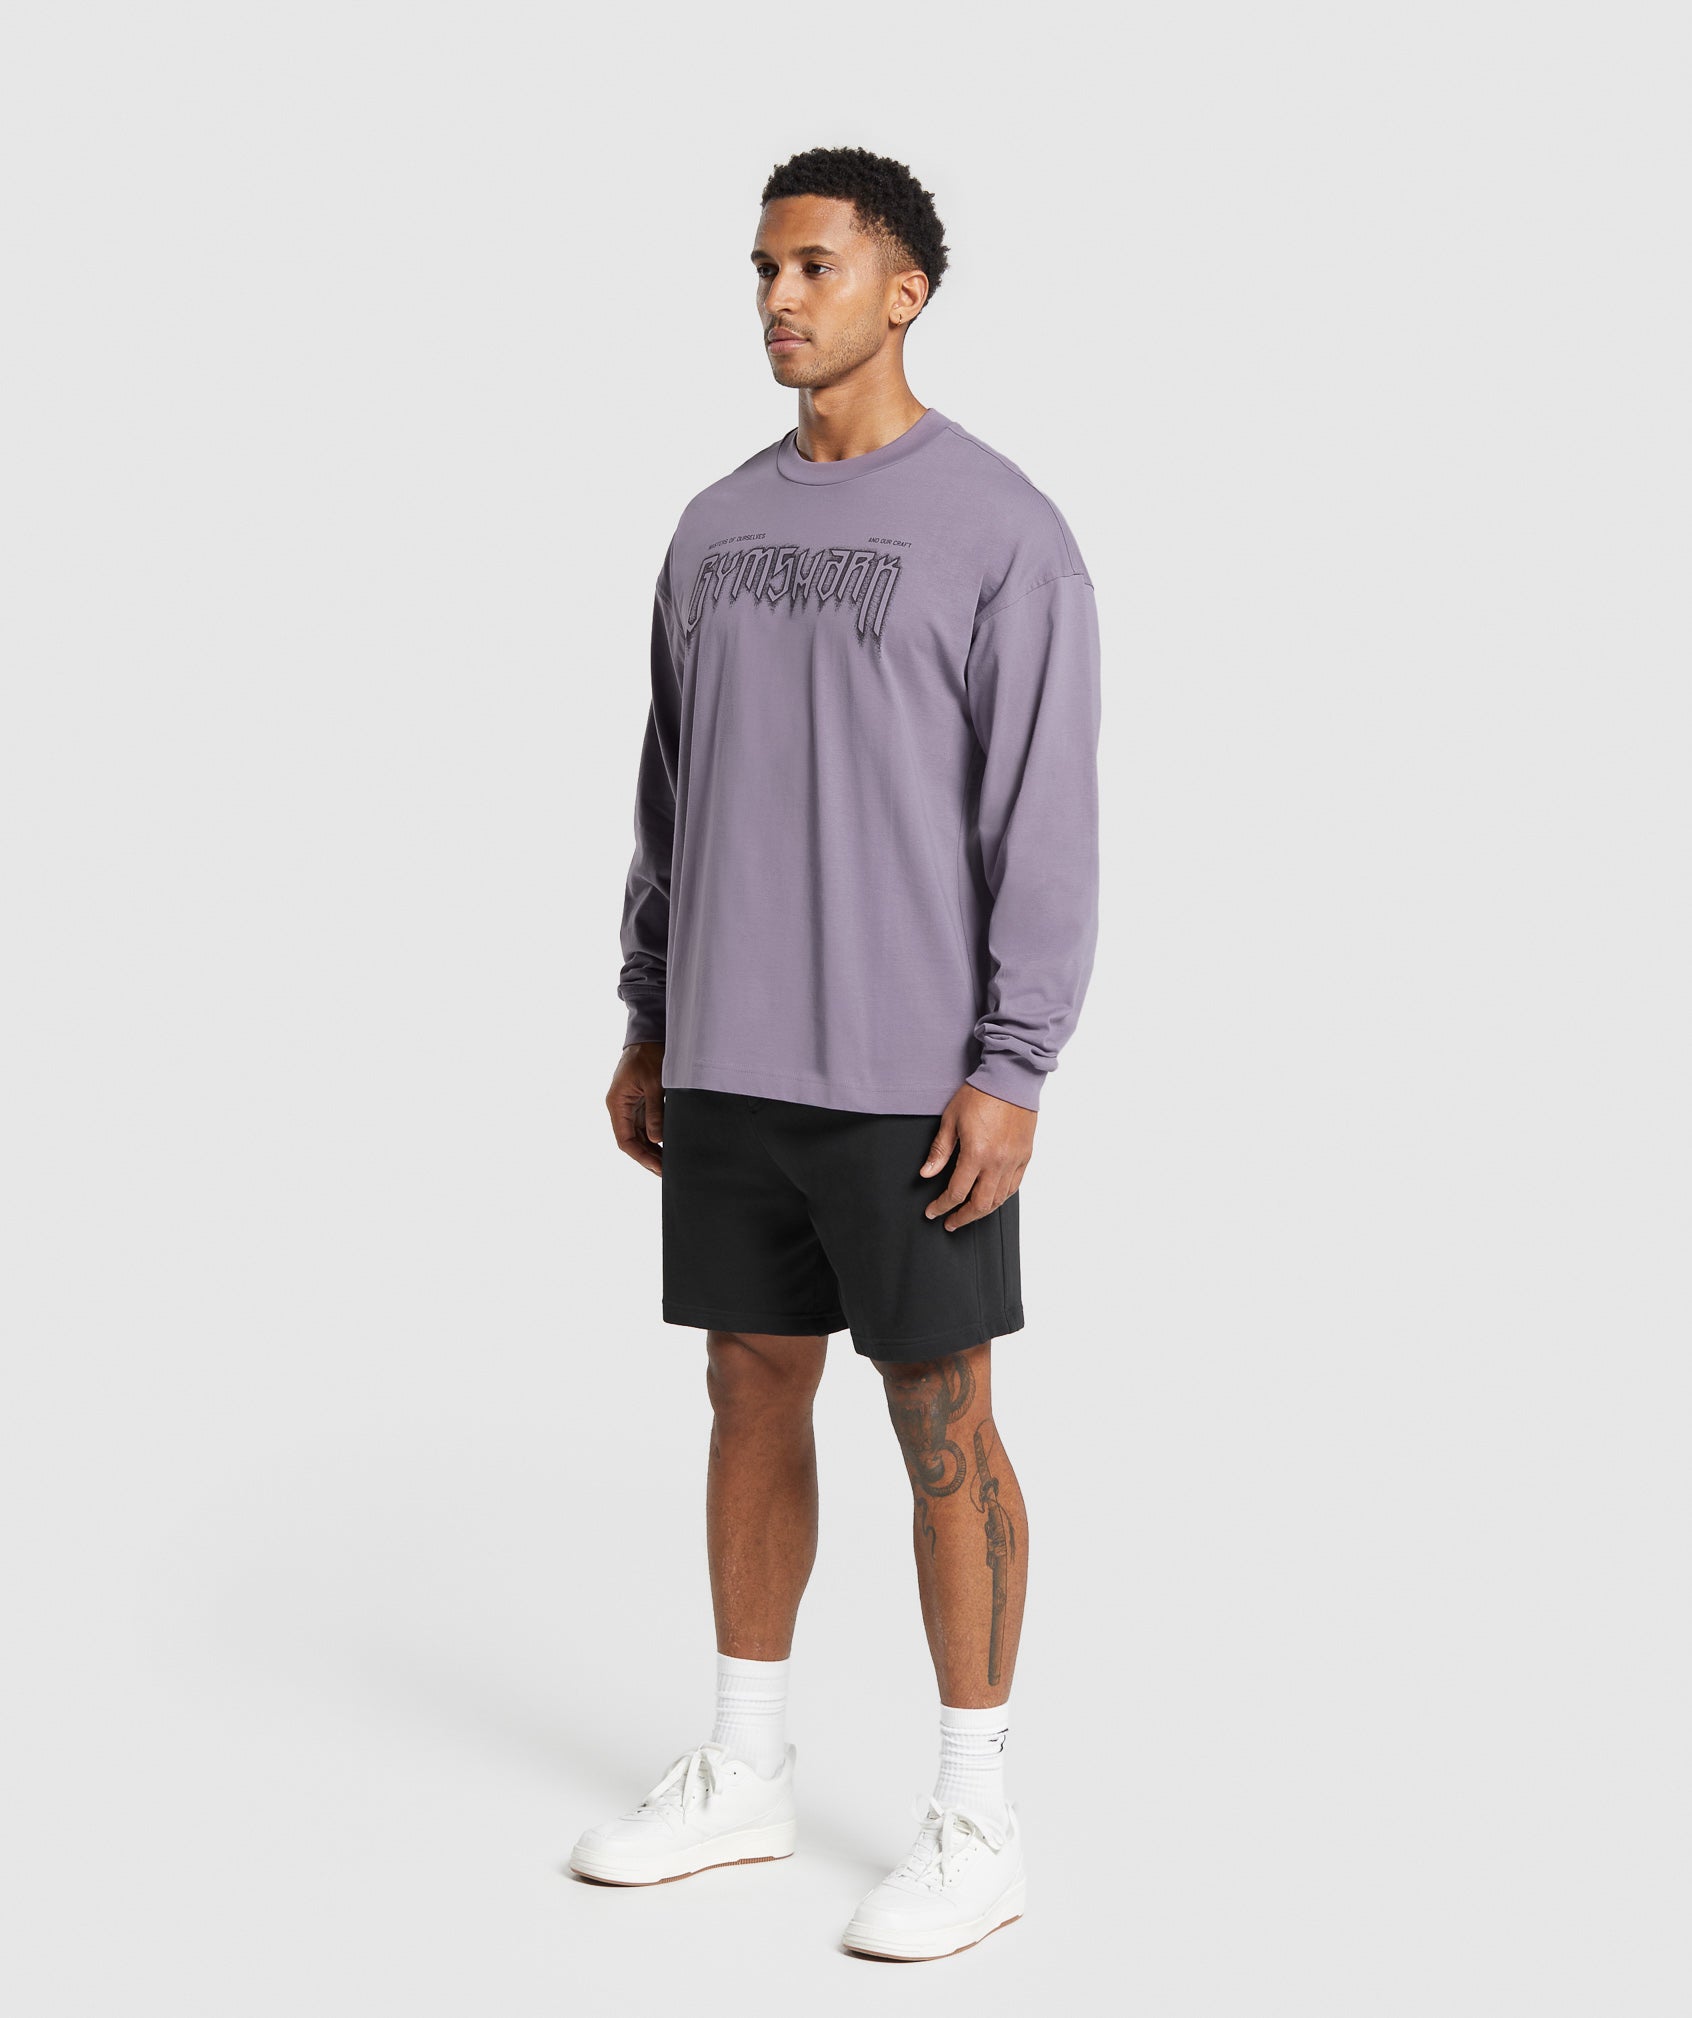 Masters of Our Craft Long Sleeve T-Shirt in Fog Purple - view 4